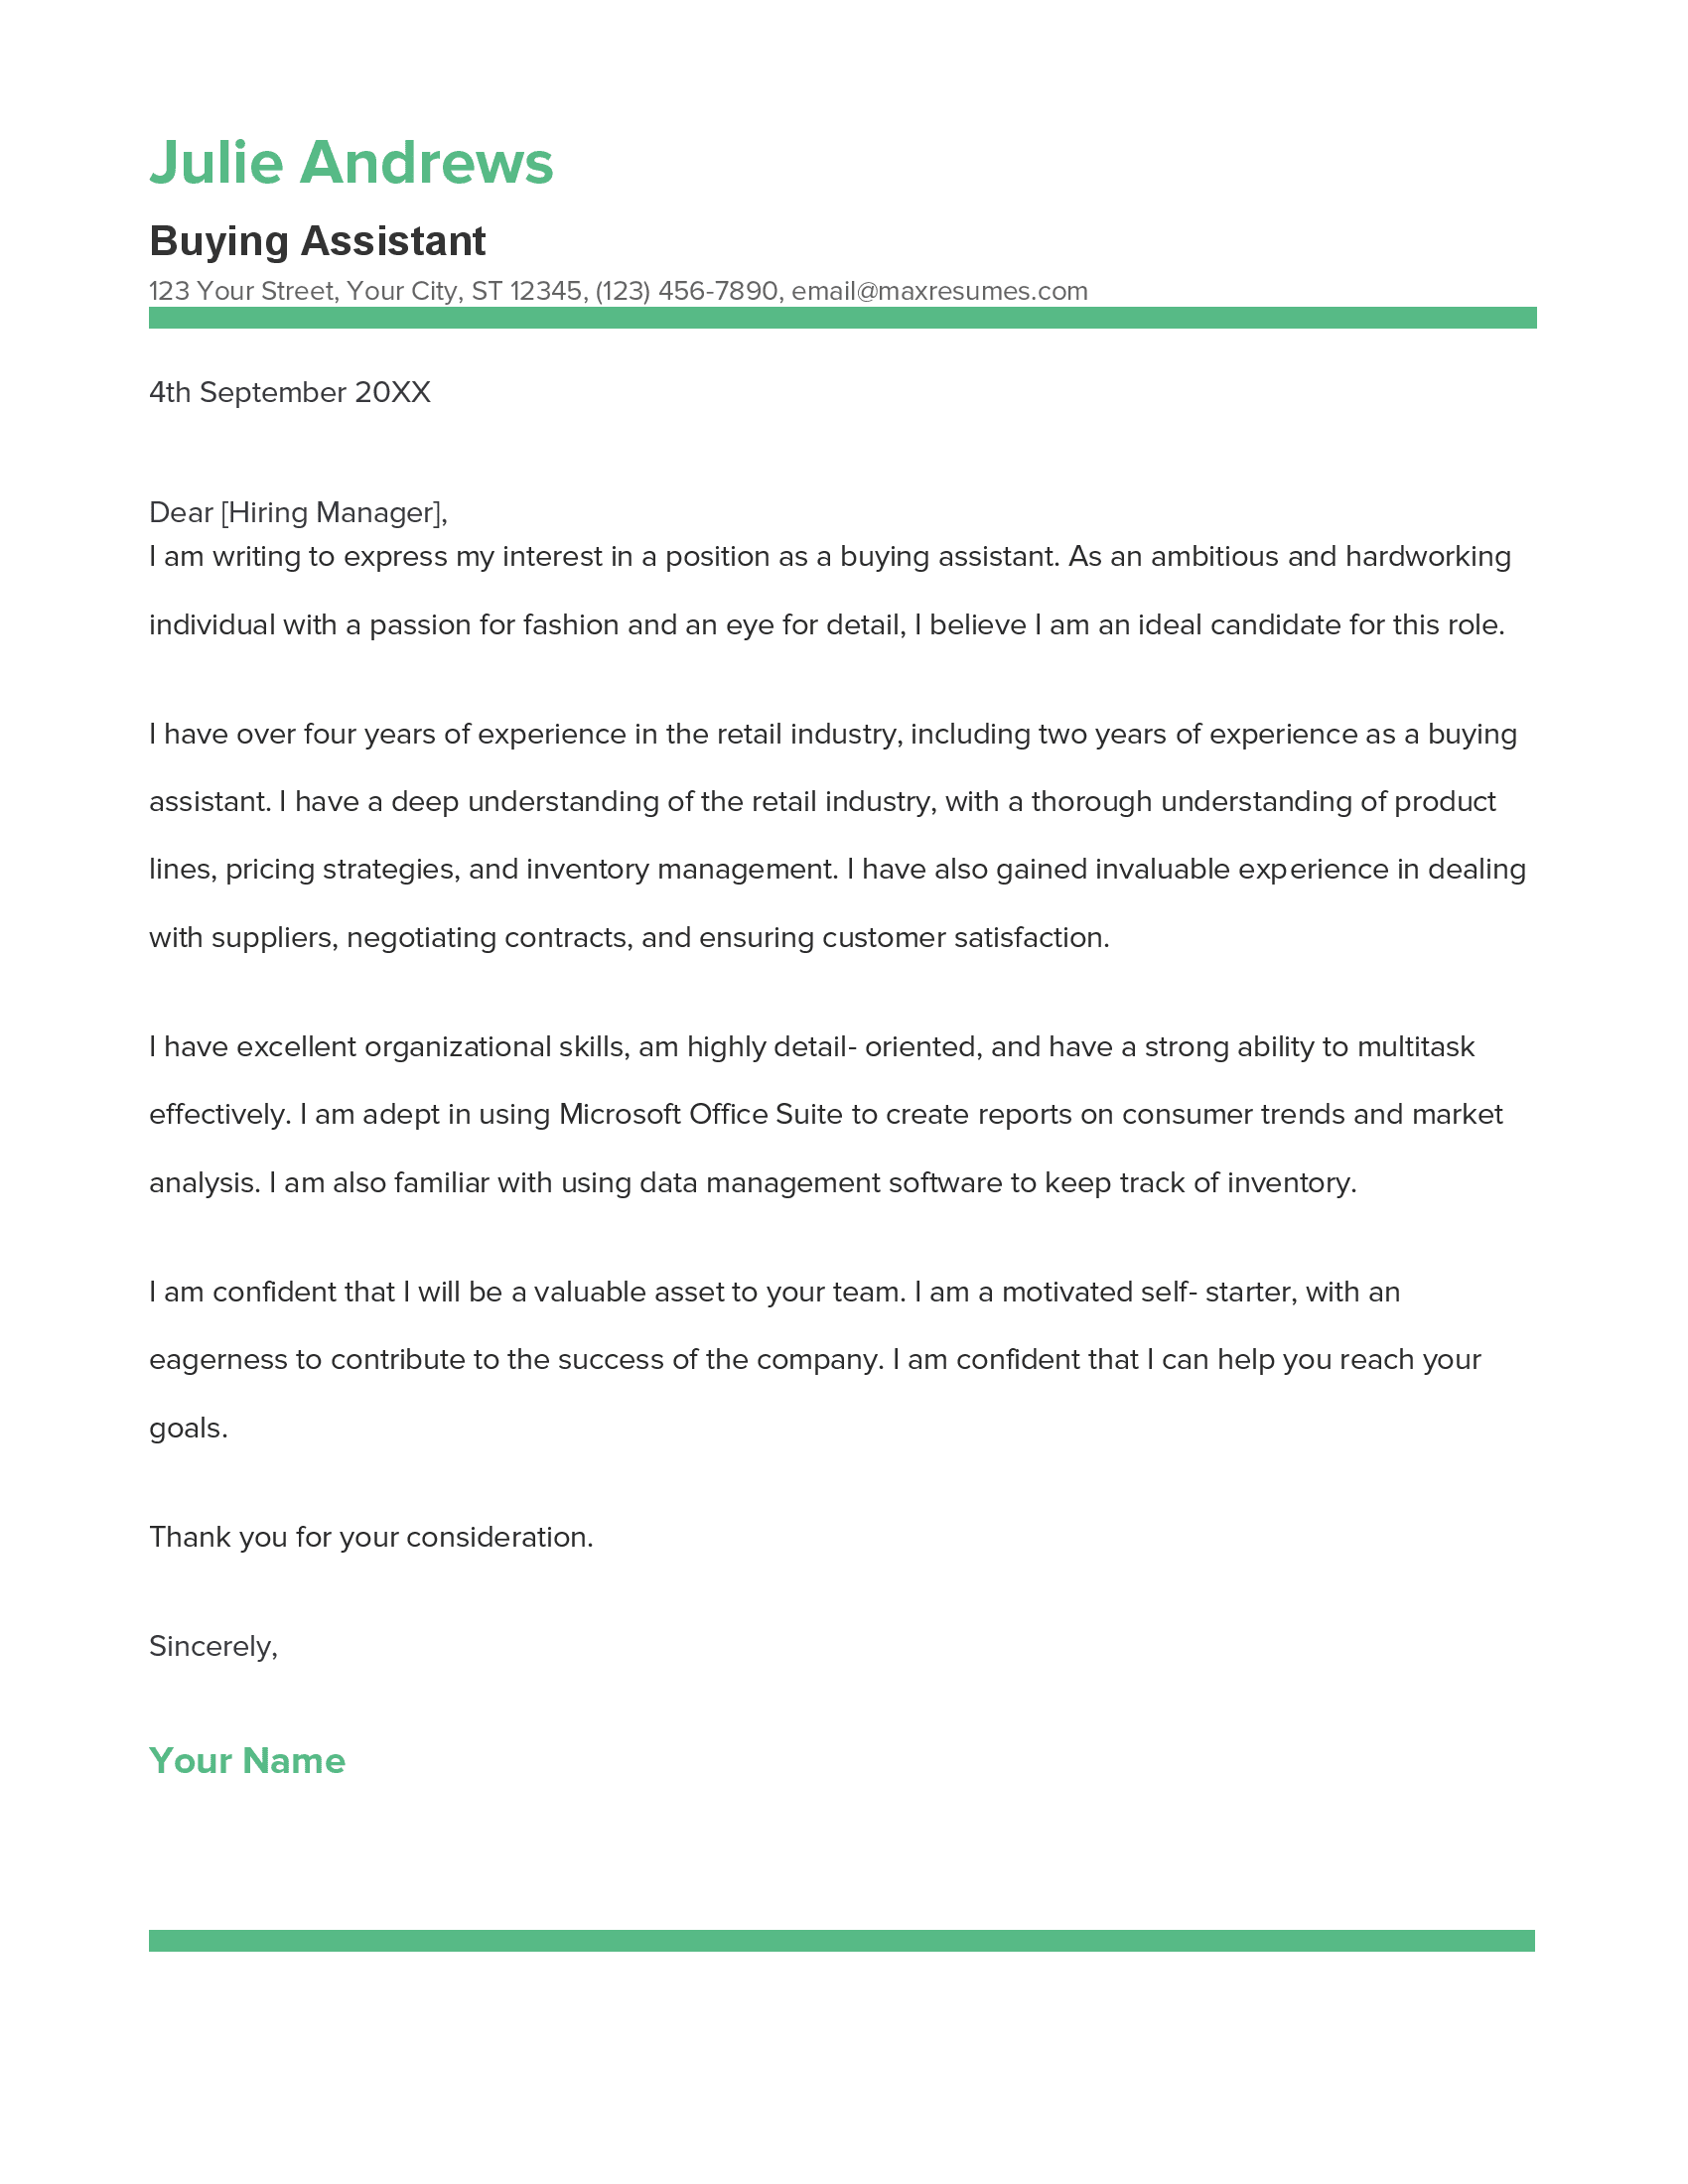 Buying Assistant Cover Letter Example